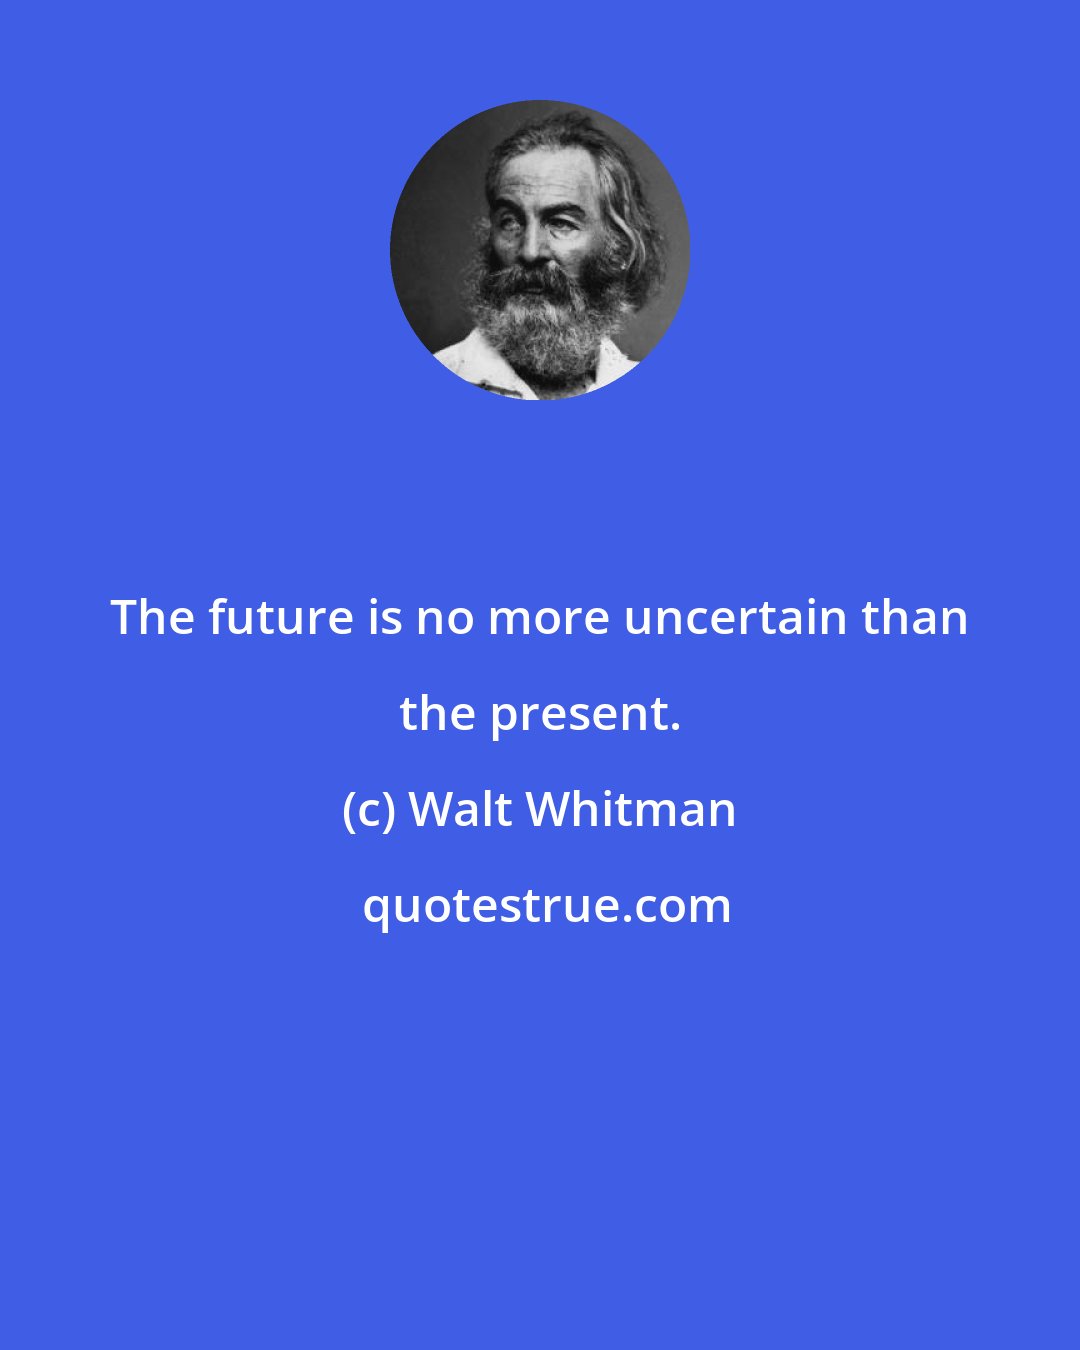 Walt Whitman: The future is no more uncertain than the present.